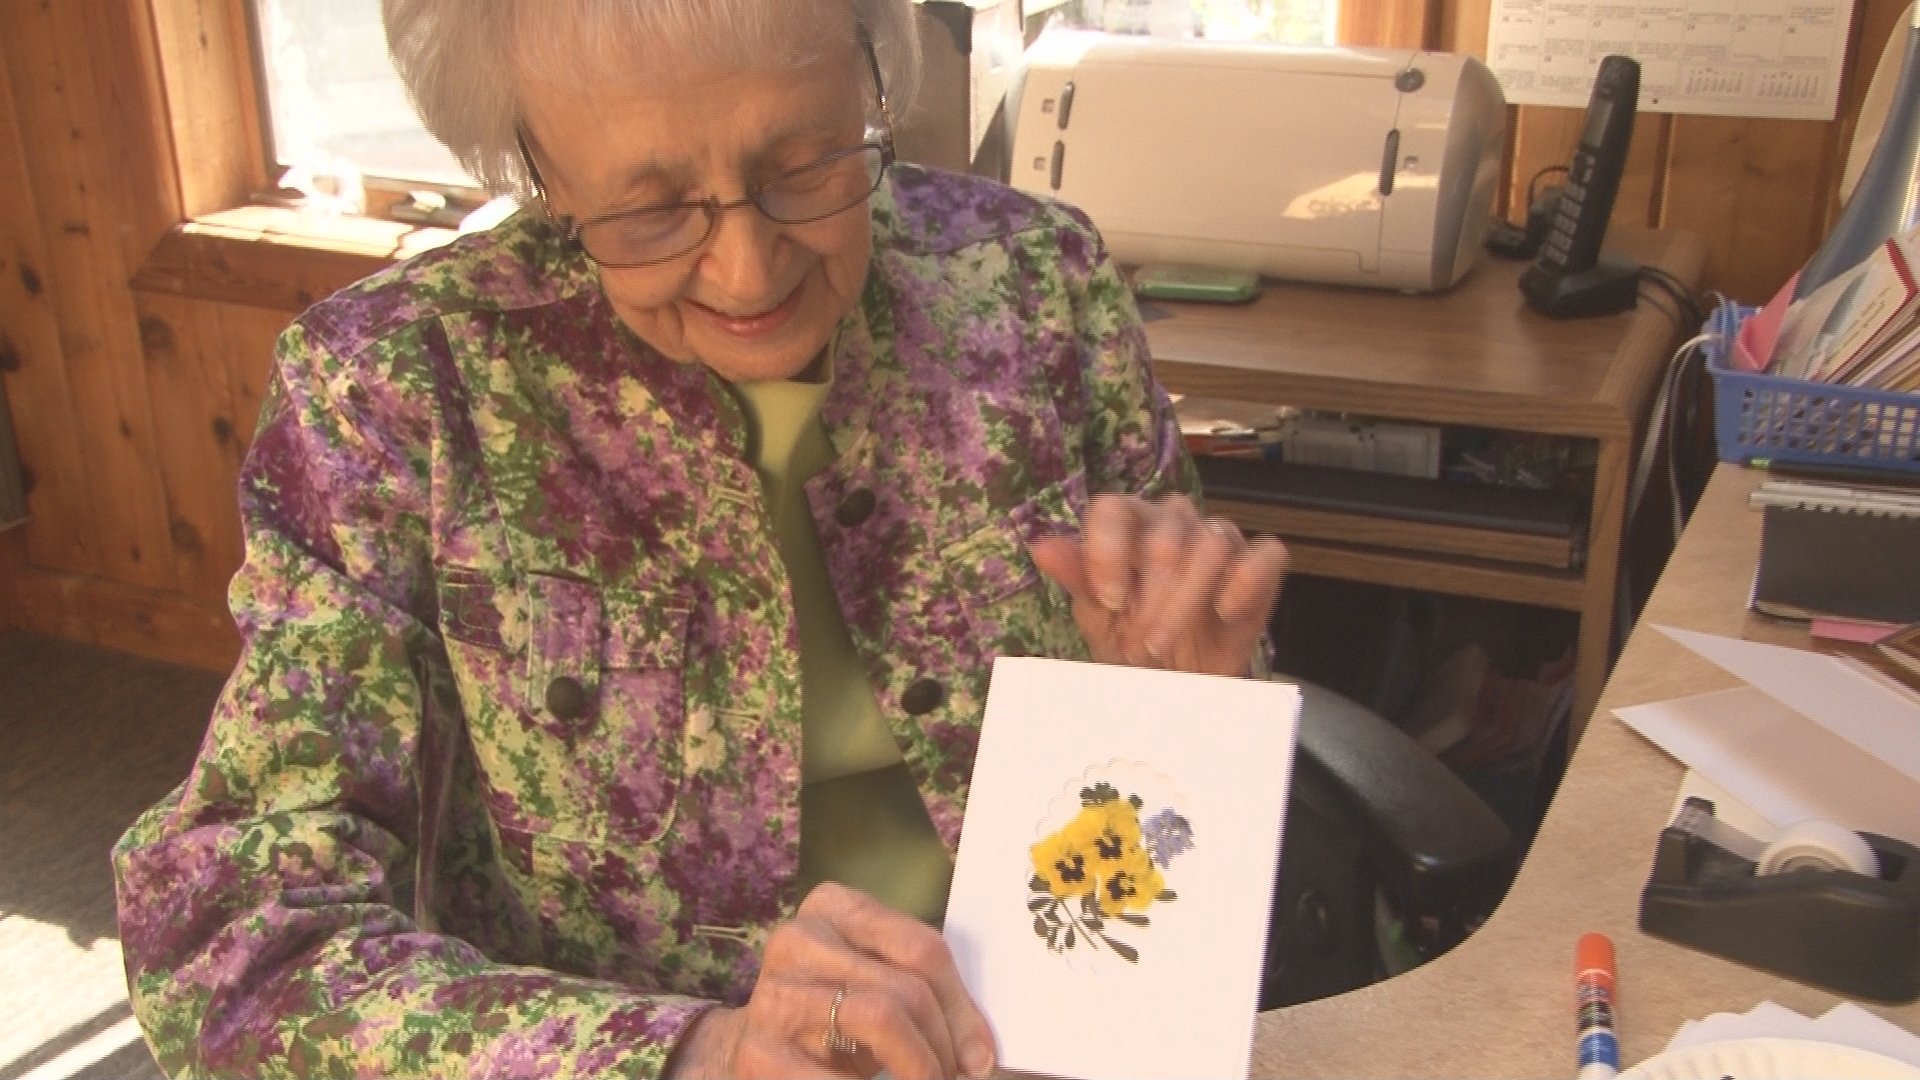 86-year-old Fran Petersen of Getzville creates handmade greeting cards and donates every penny of her sales to charity- $127,000 so far.